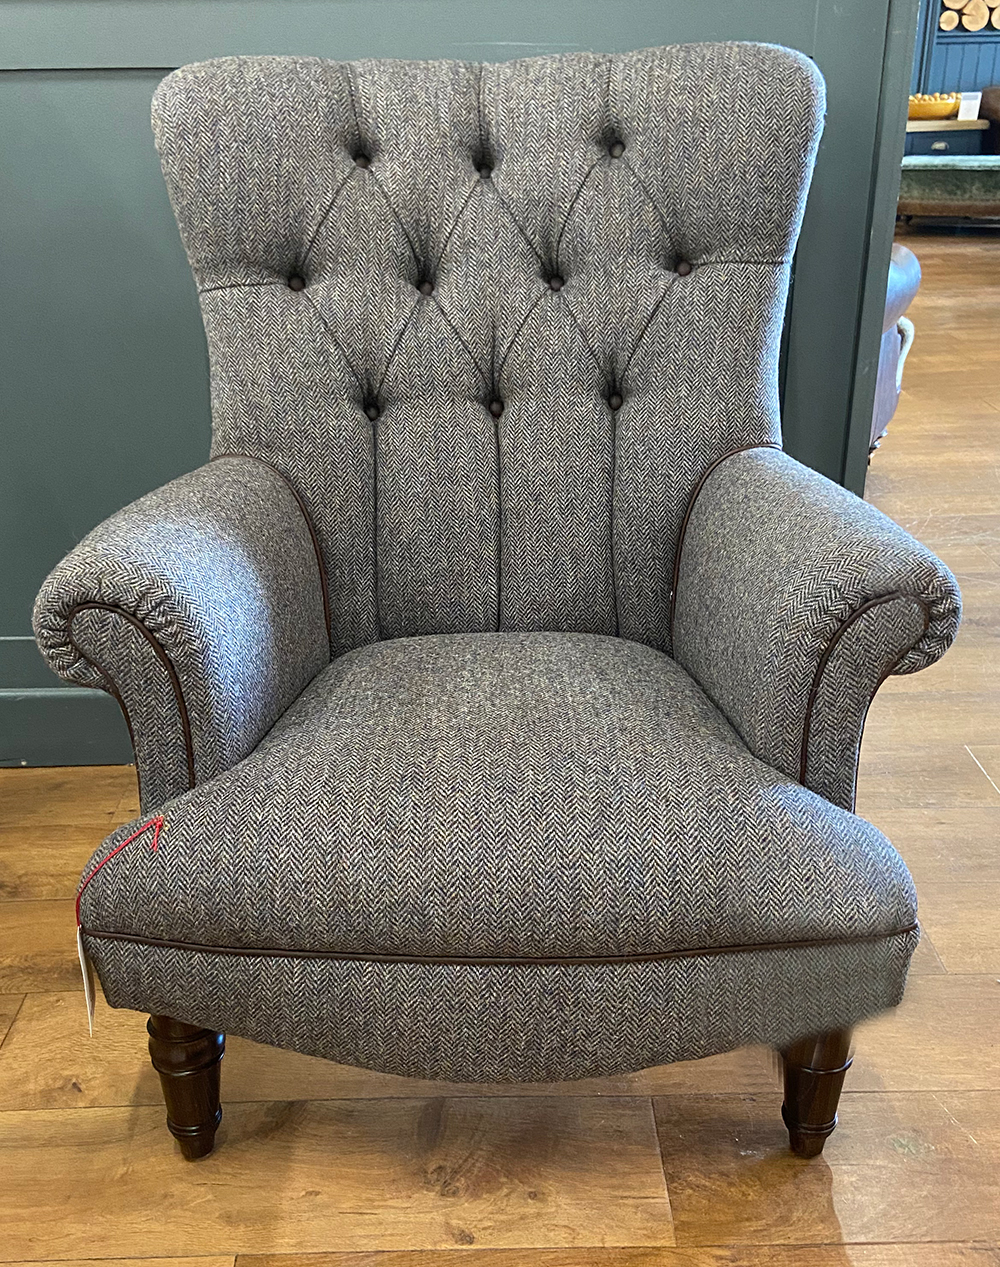 Tetrad Regent Chair in Basalt Herringbone with Old Bard Piping | Shackletons